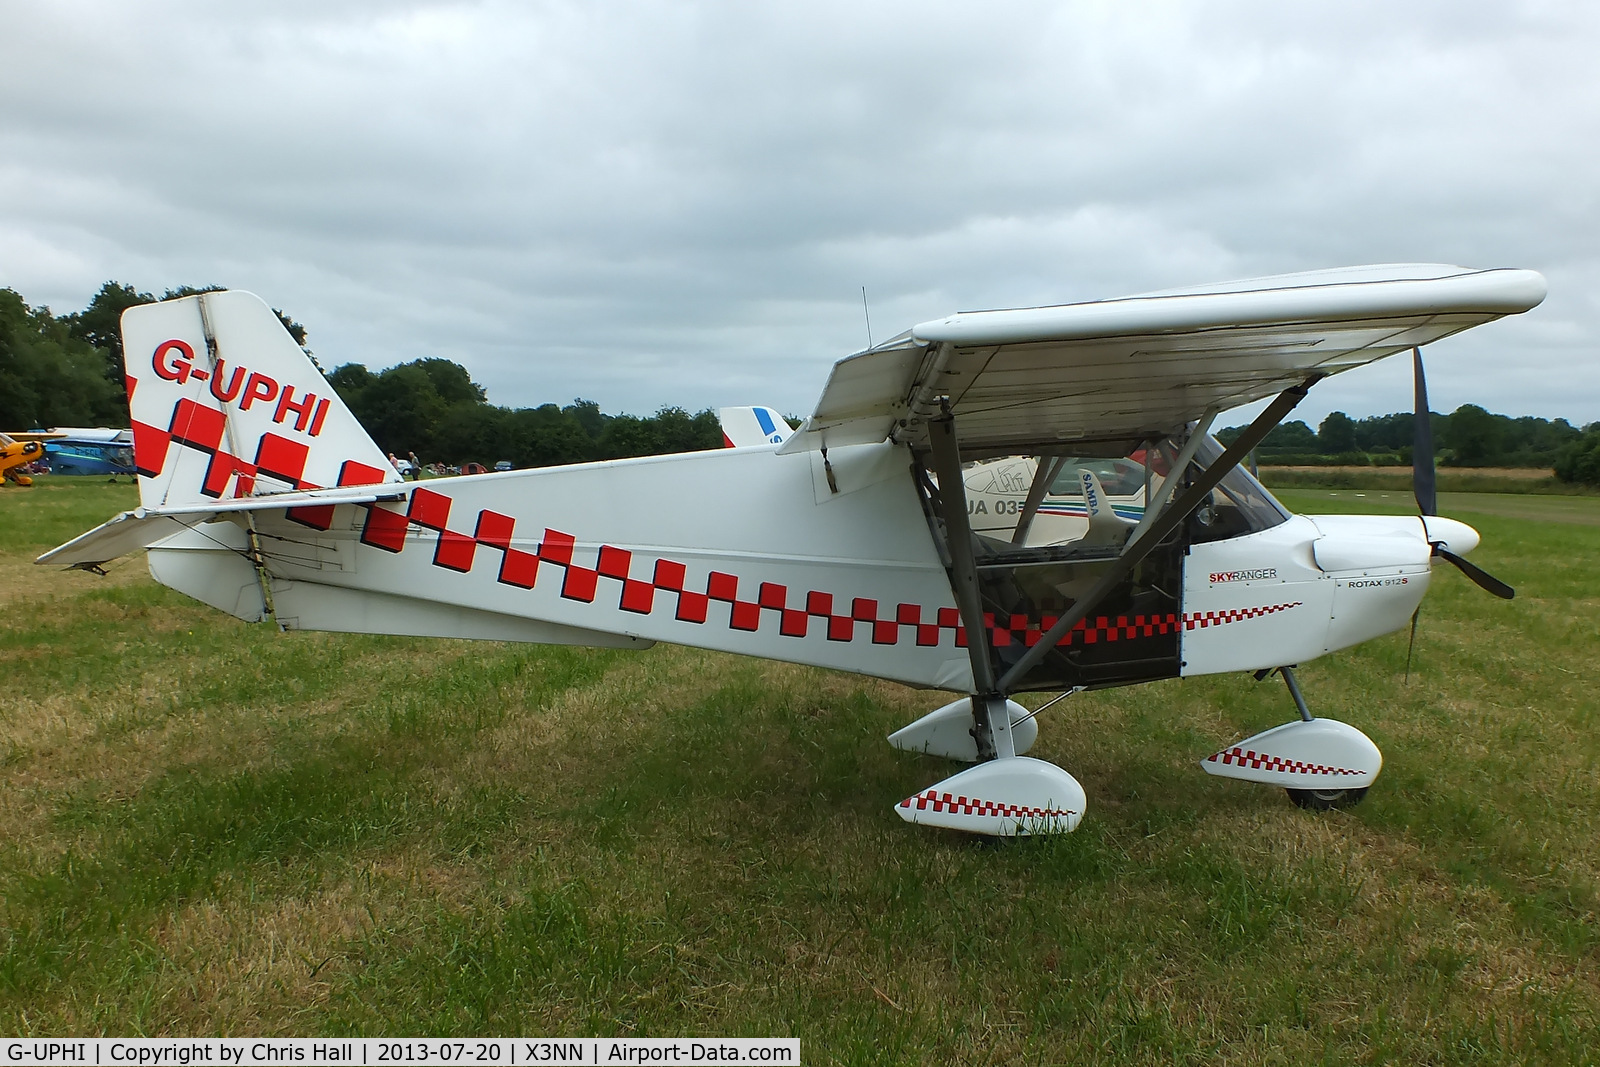 G-UPHI, 2006 Best Off Skyranger Swift 912S(1) C/N BMAA/HB/480, at the Stoke Golding stakeout 2013